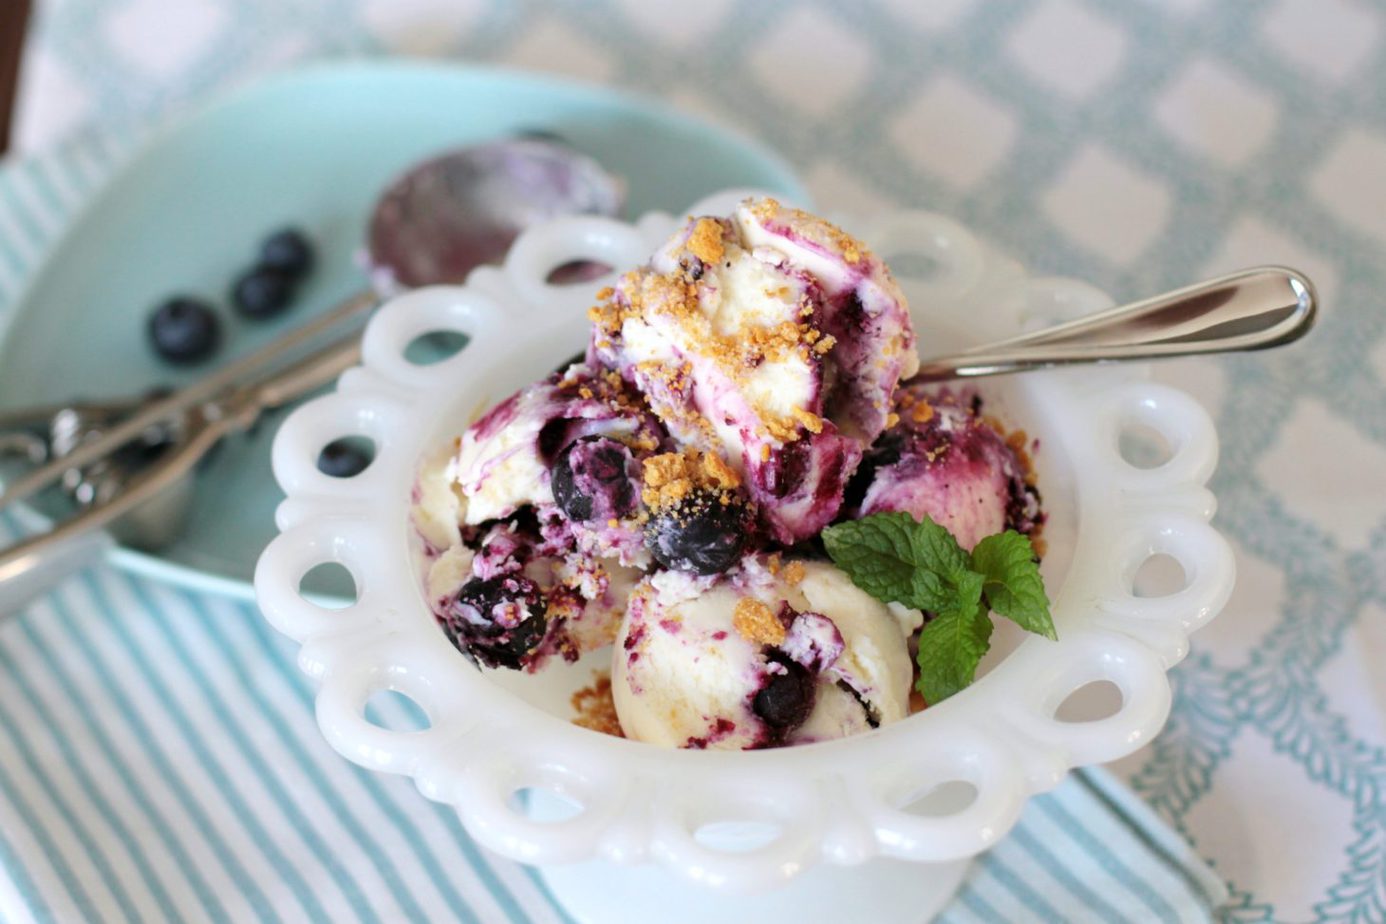 A vintage bowl filled with scoops of blueberry cheesecake ice cream.